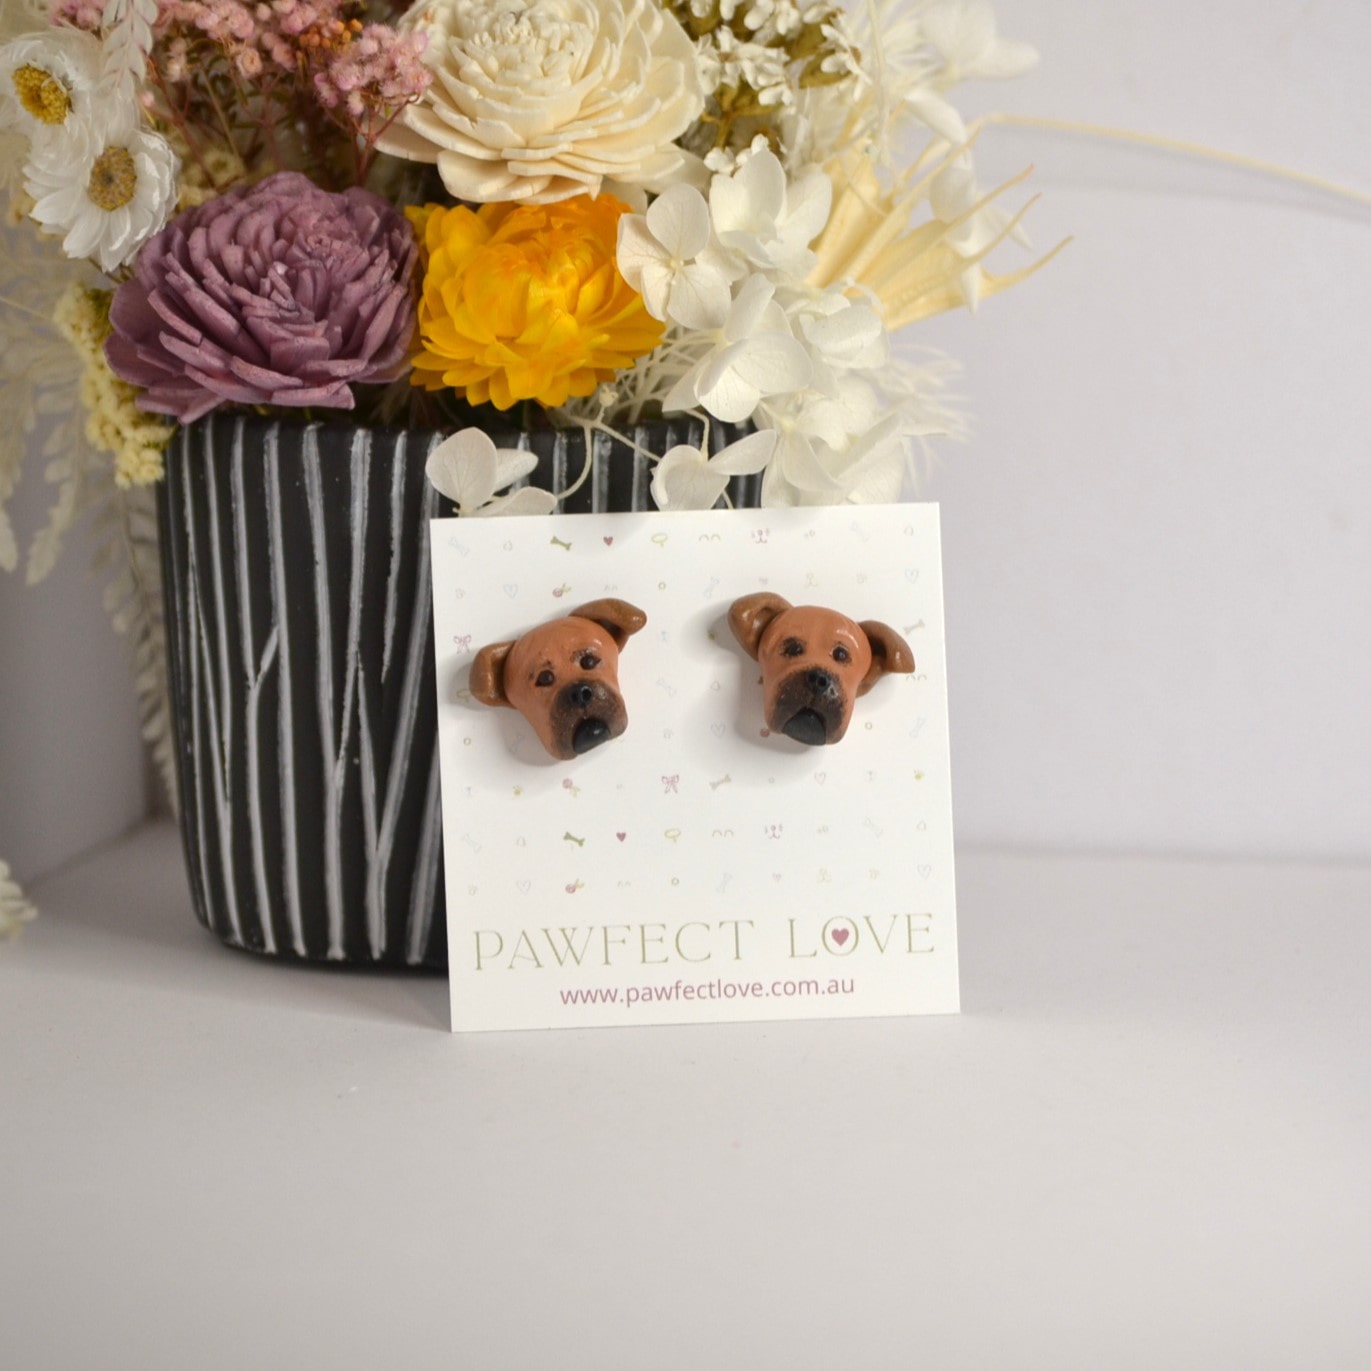 Handmade staffie stud earrings by Pawfect Love, positioned in front of dried flower arrangement